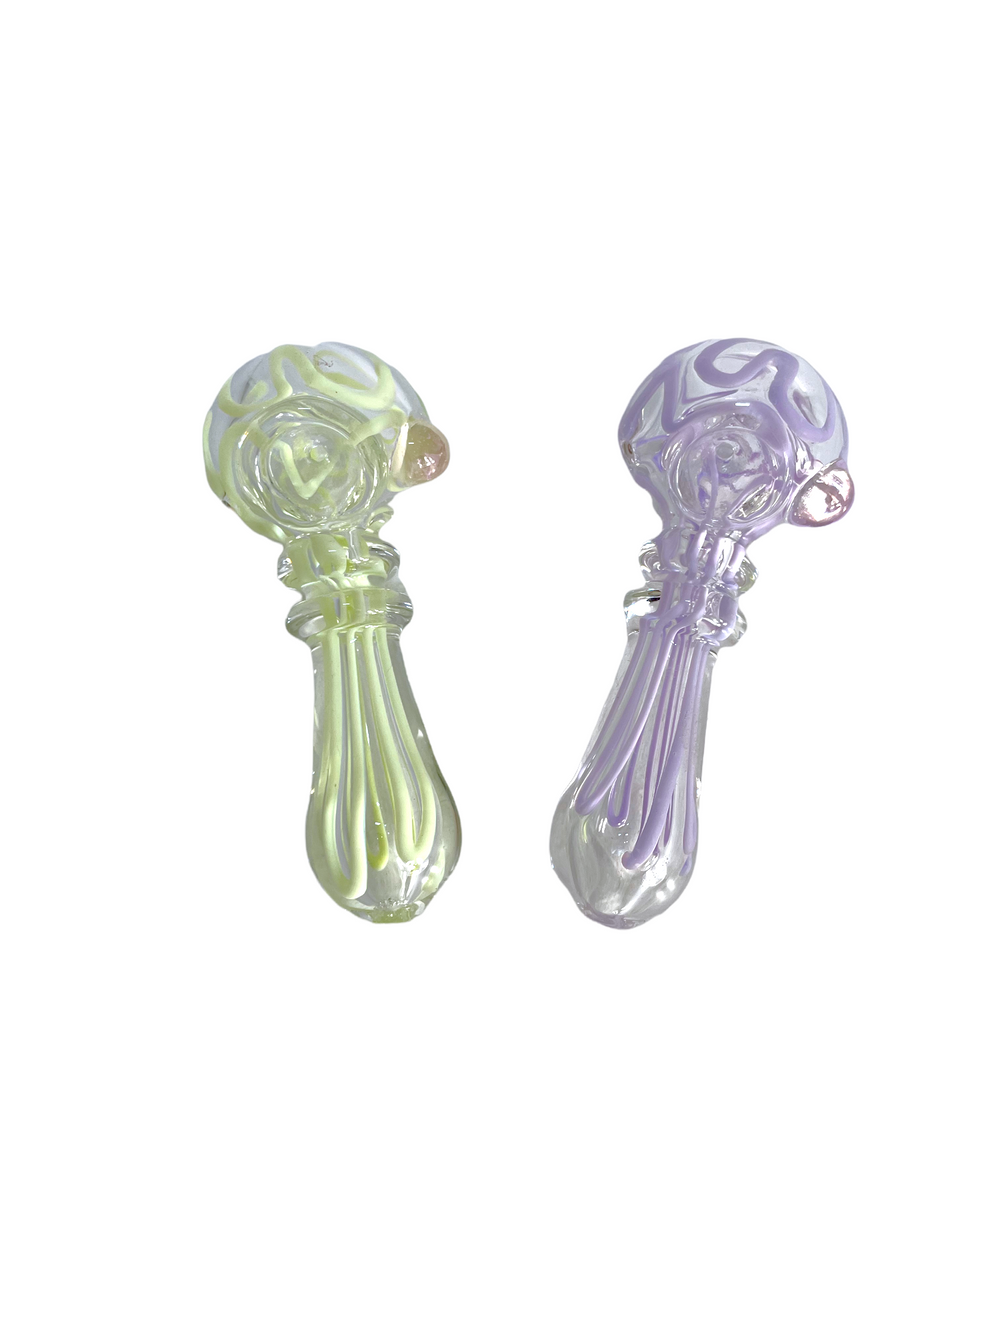 4" Double Ring Swirl Glass Hand Pipe